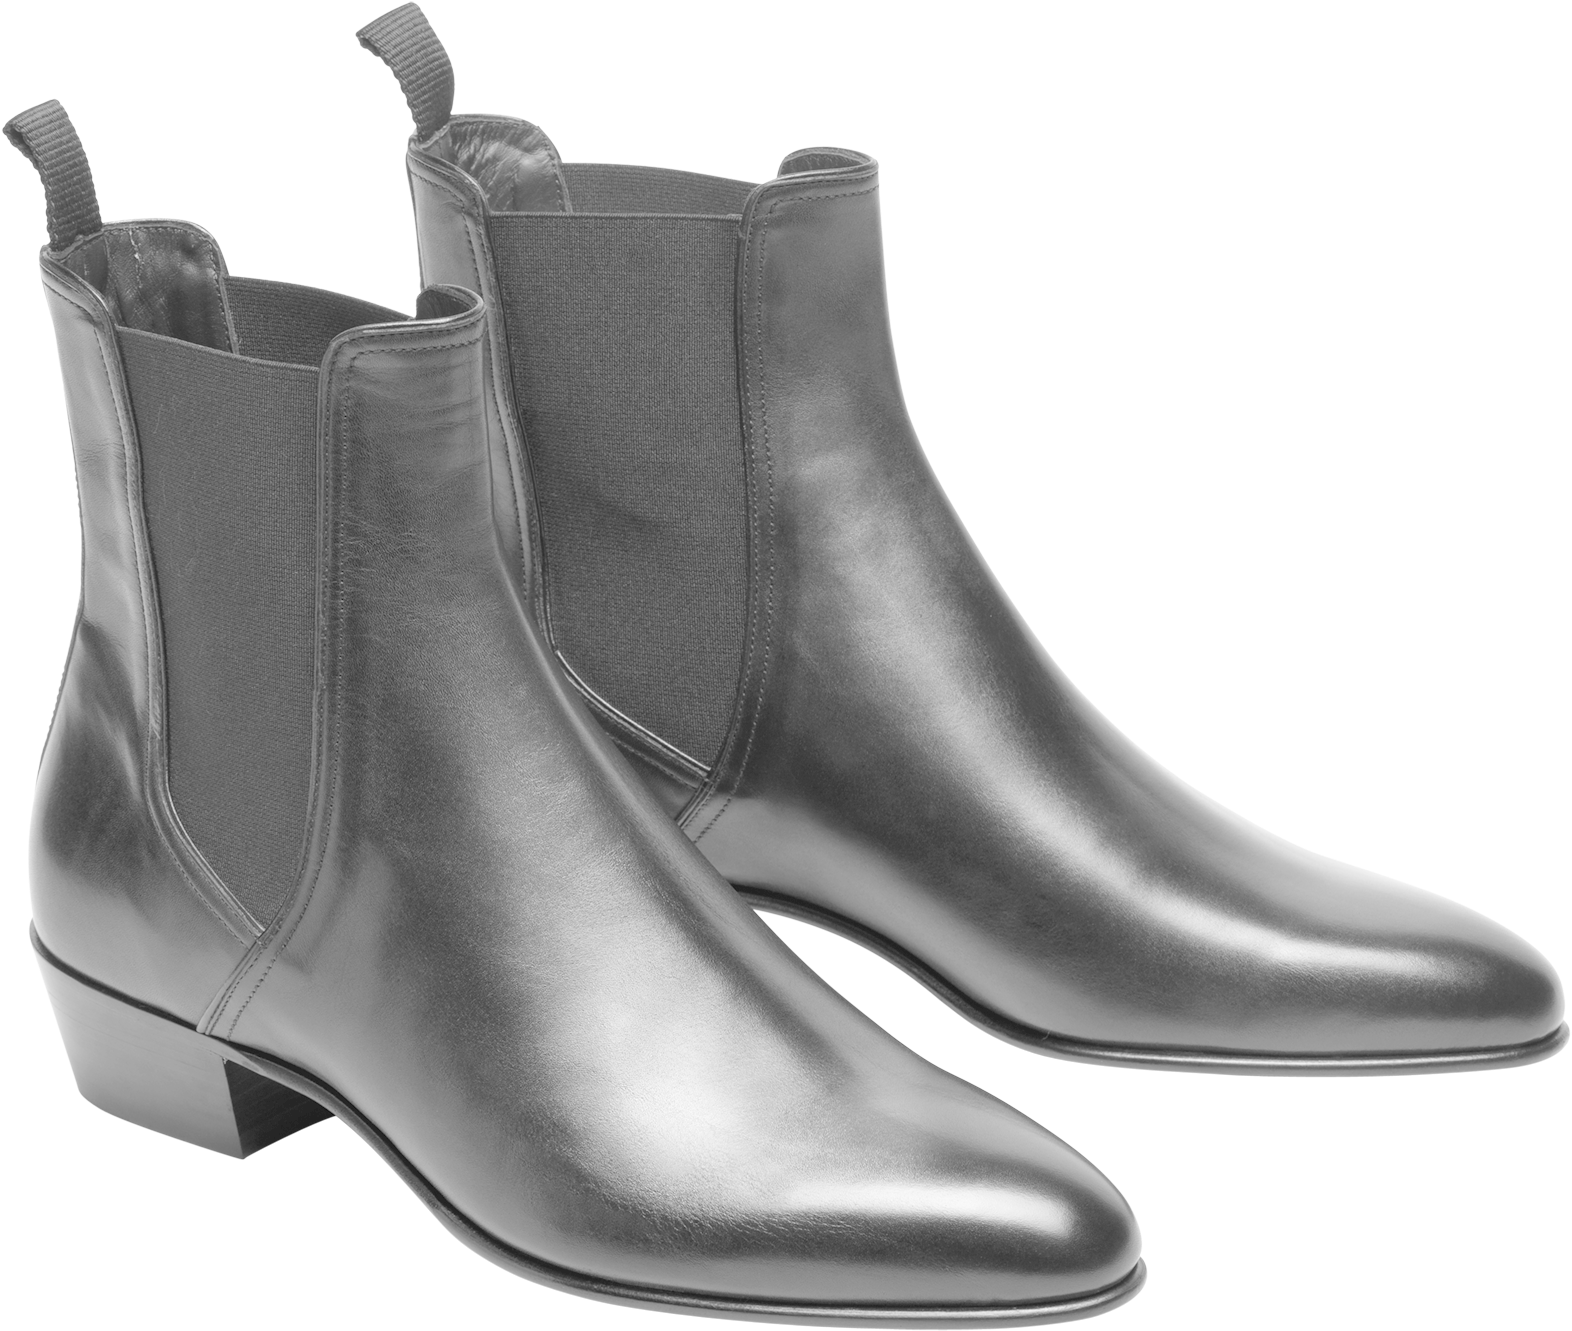 Silver Ankle Boots PNG image